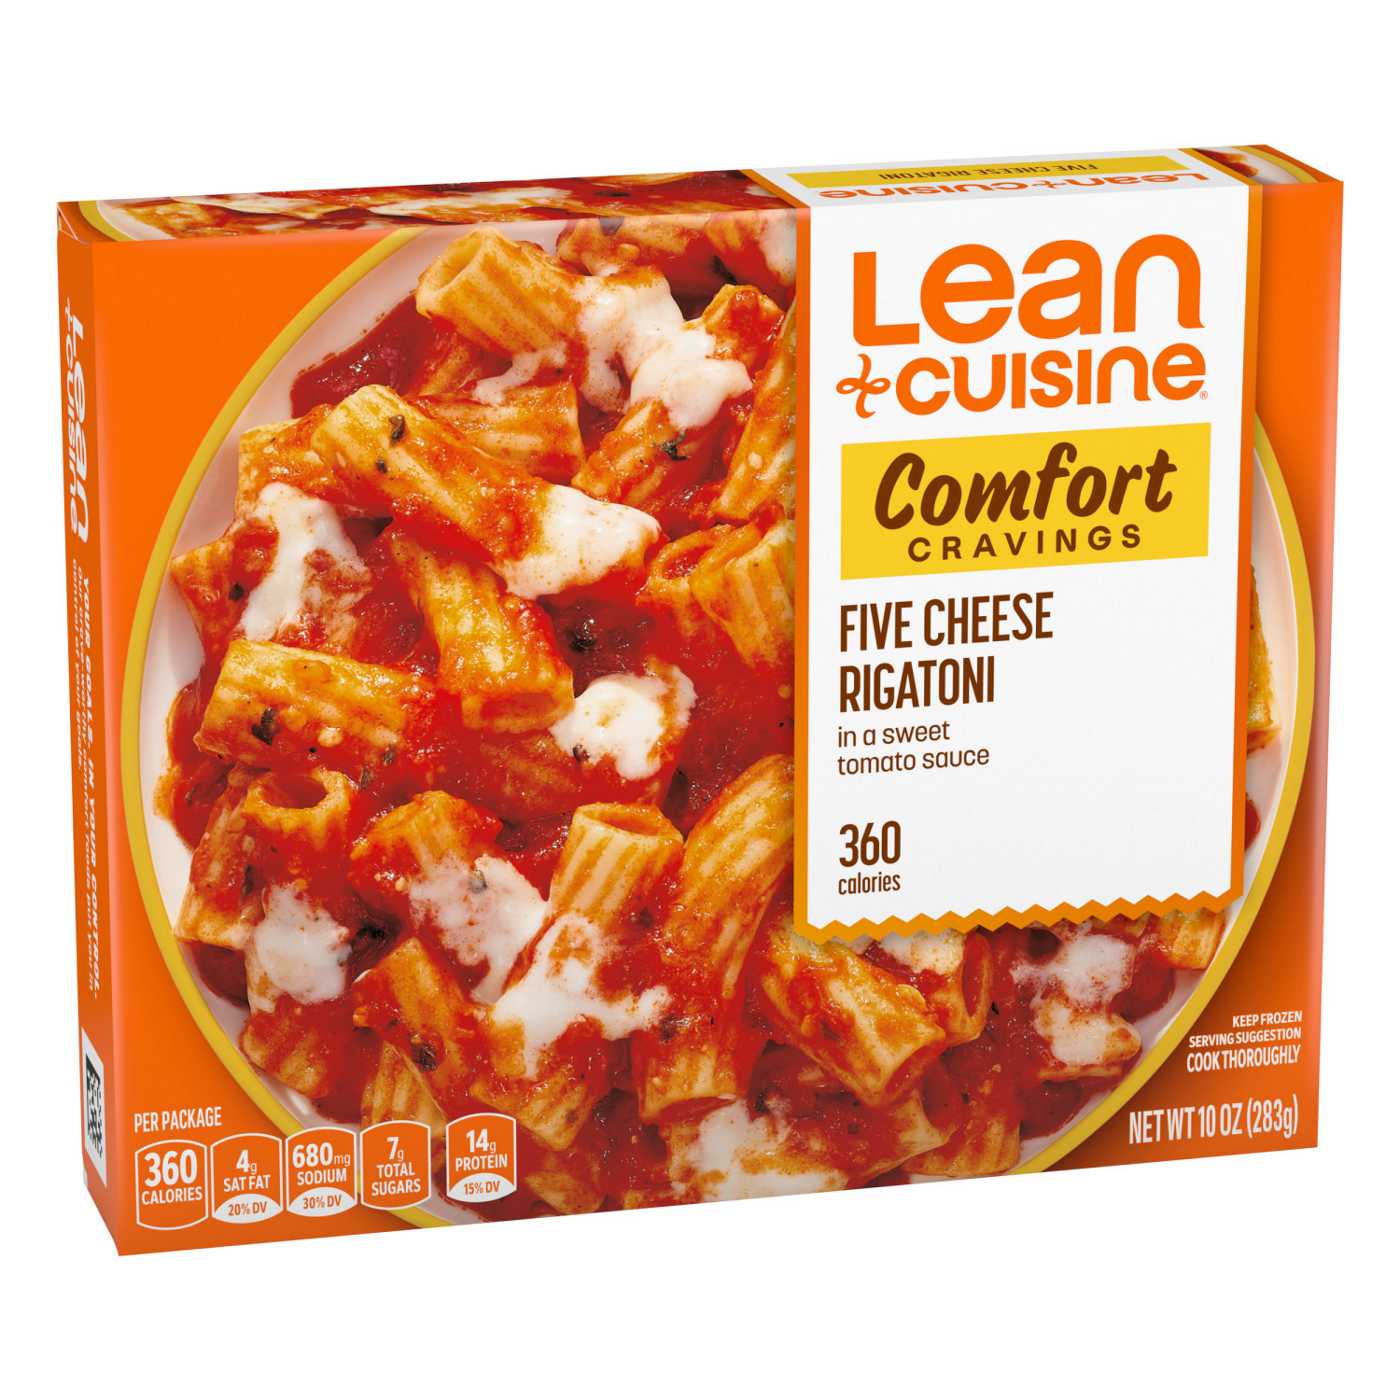 Lean Cuisine Comfort Cravings 5 Cheese Rigatoni Frozen Meal; image 7 of 8